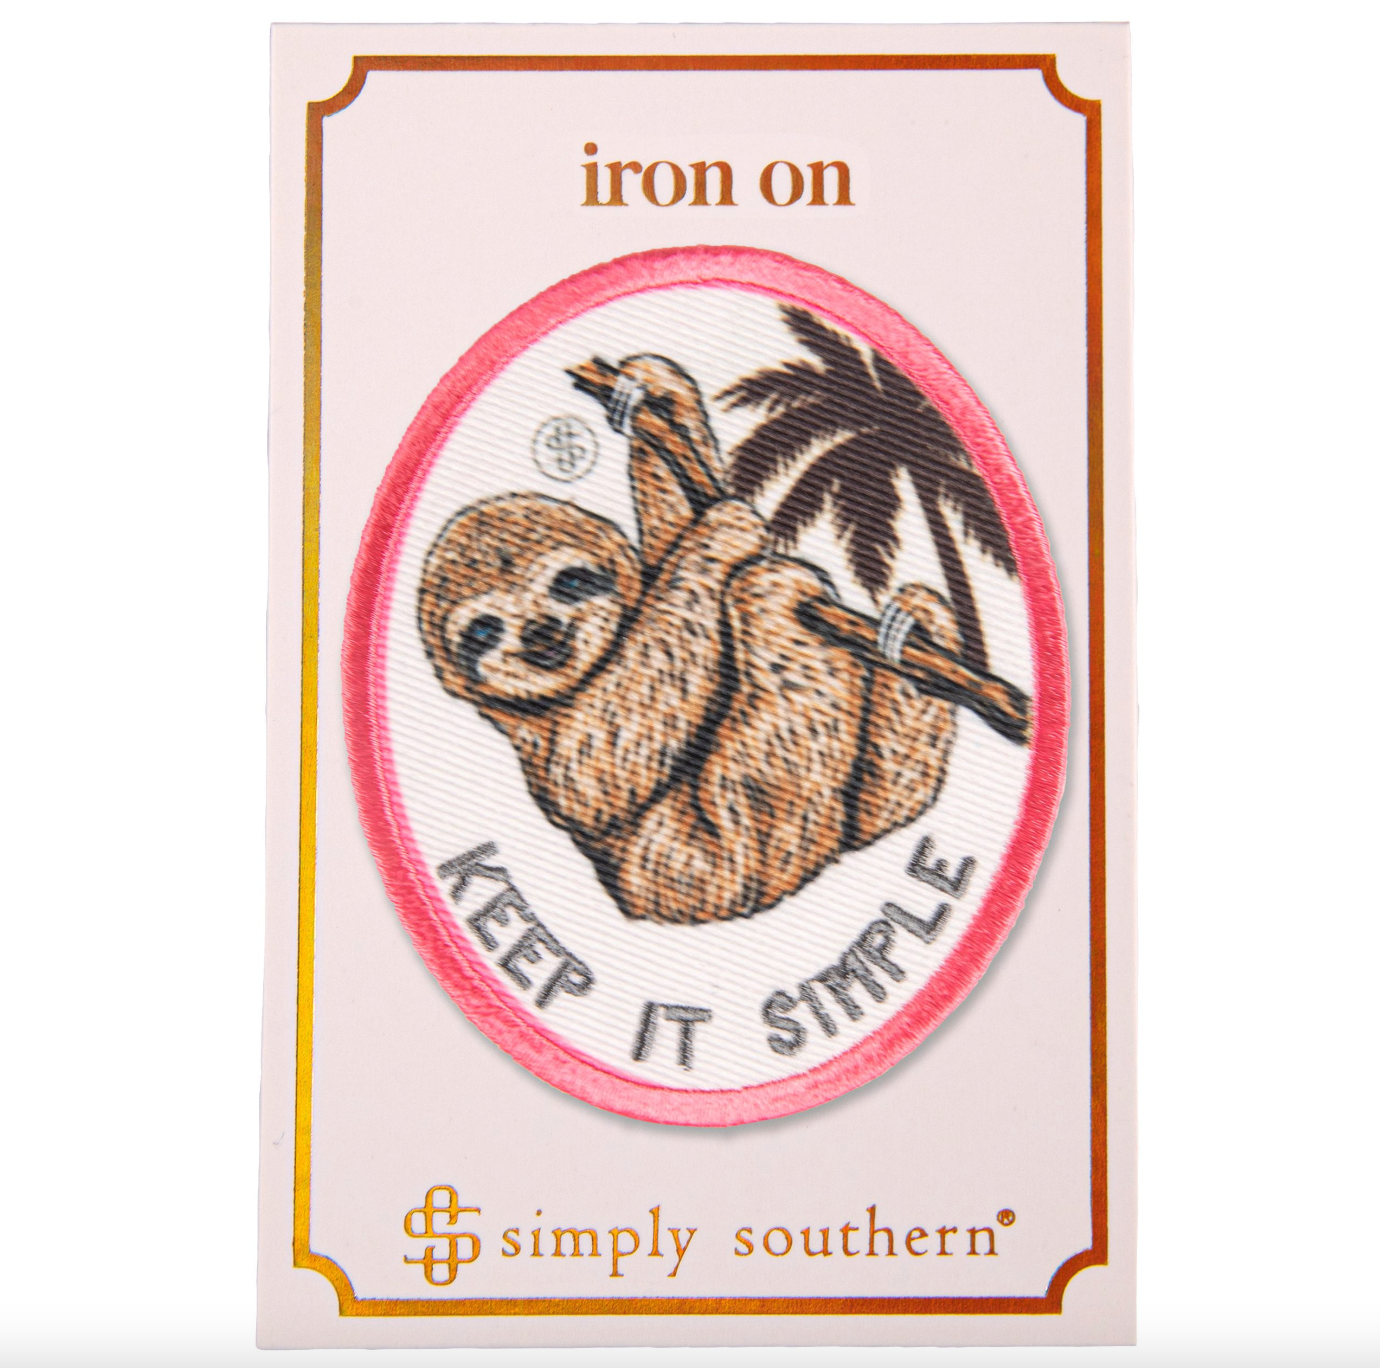 IRON ON GRAPHIC PATCHES